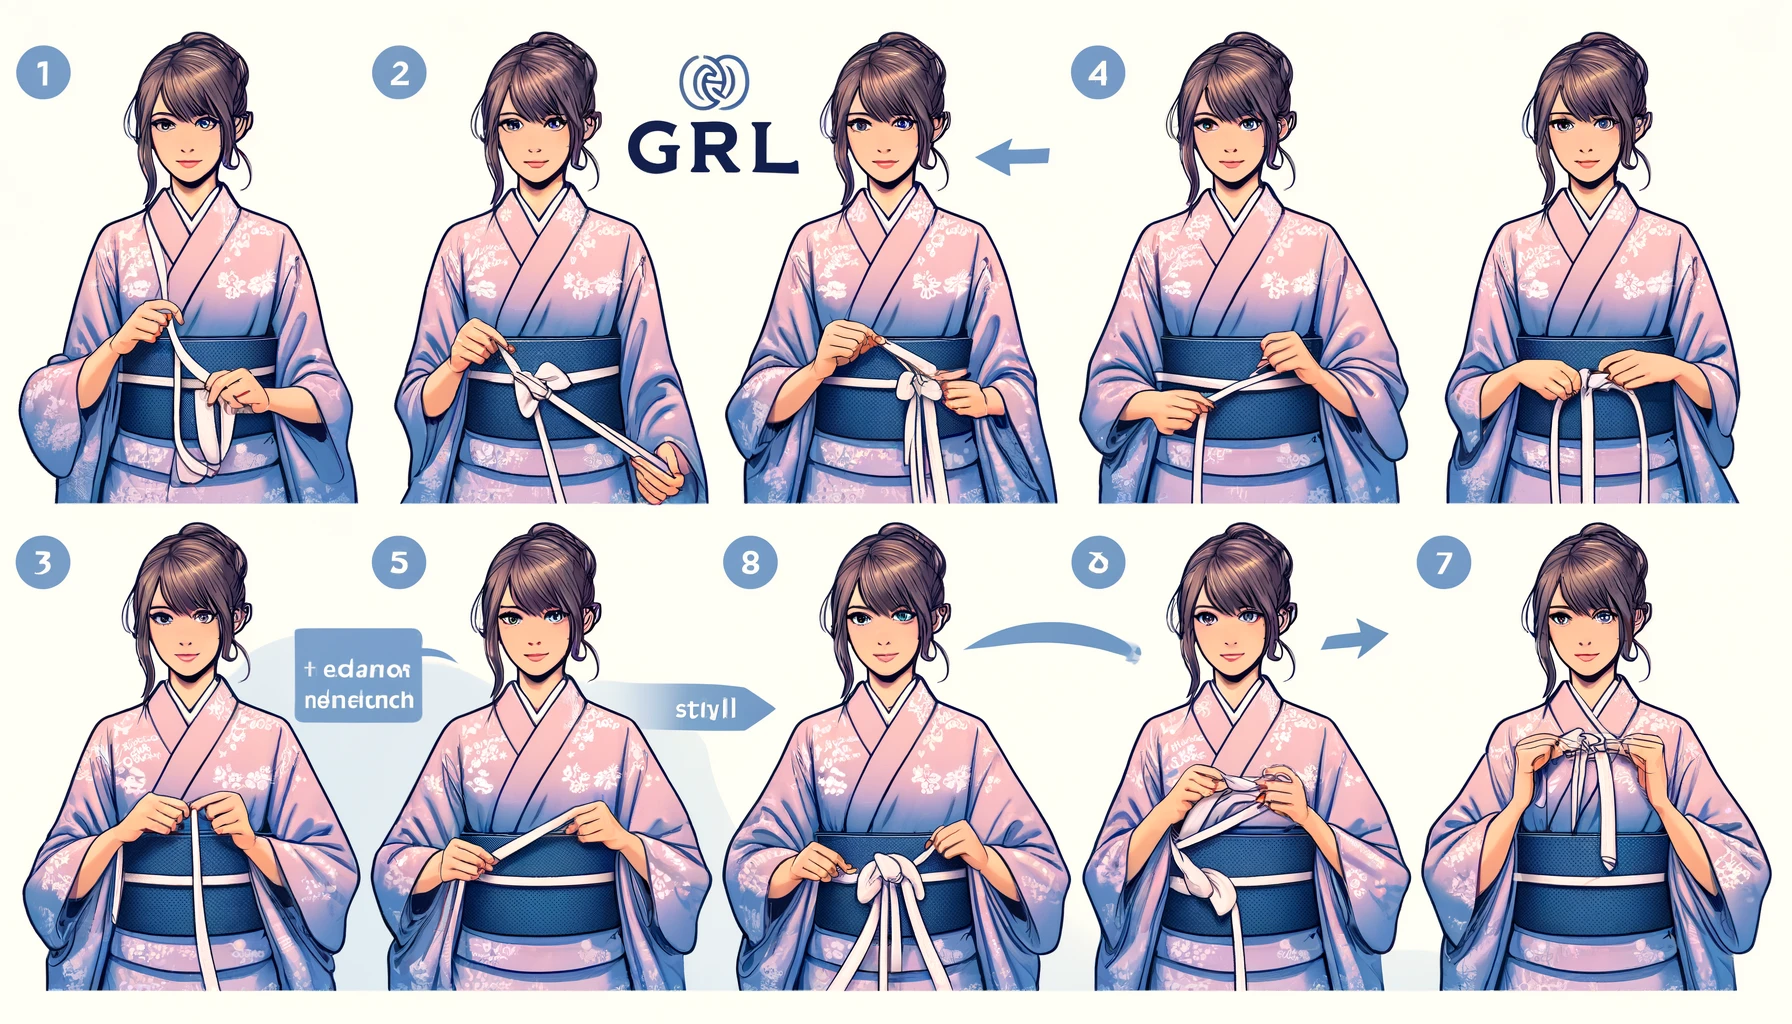 A step-by-step guide showing how to tie an obi for a GRL yukata. The image features clear illustrations of each step involved in tying the obi, with a focus on the traditional and stylish knots. The background includes a model wearing a GRL yukata, and the text 'GRL' is included prominently in the guide.